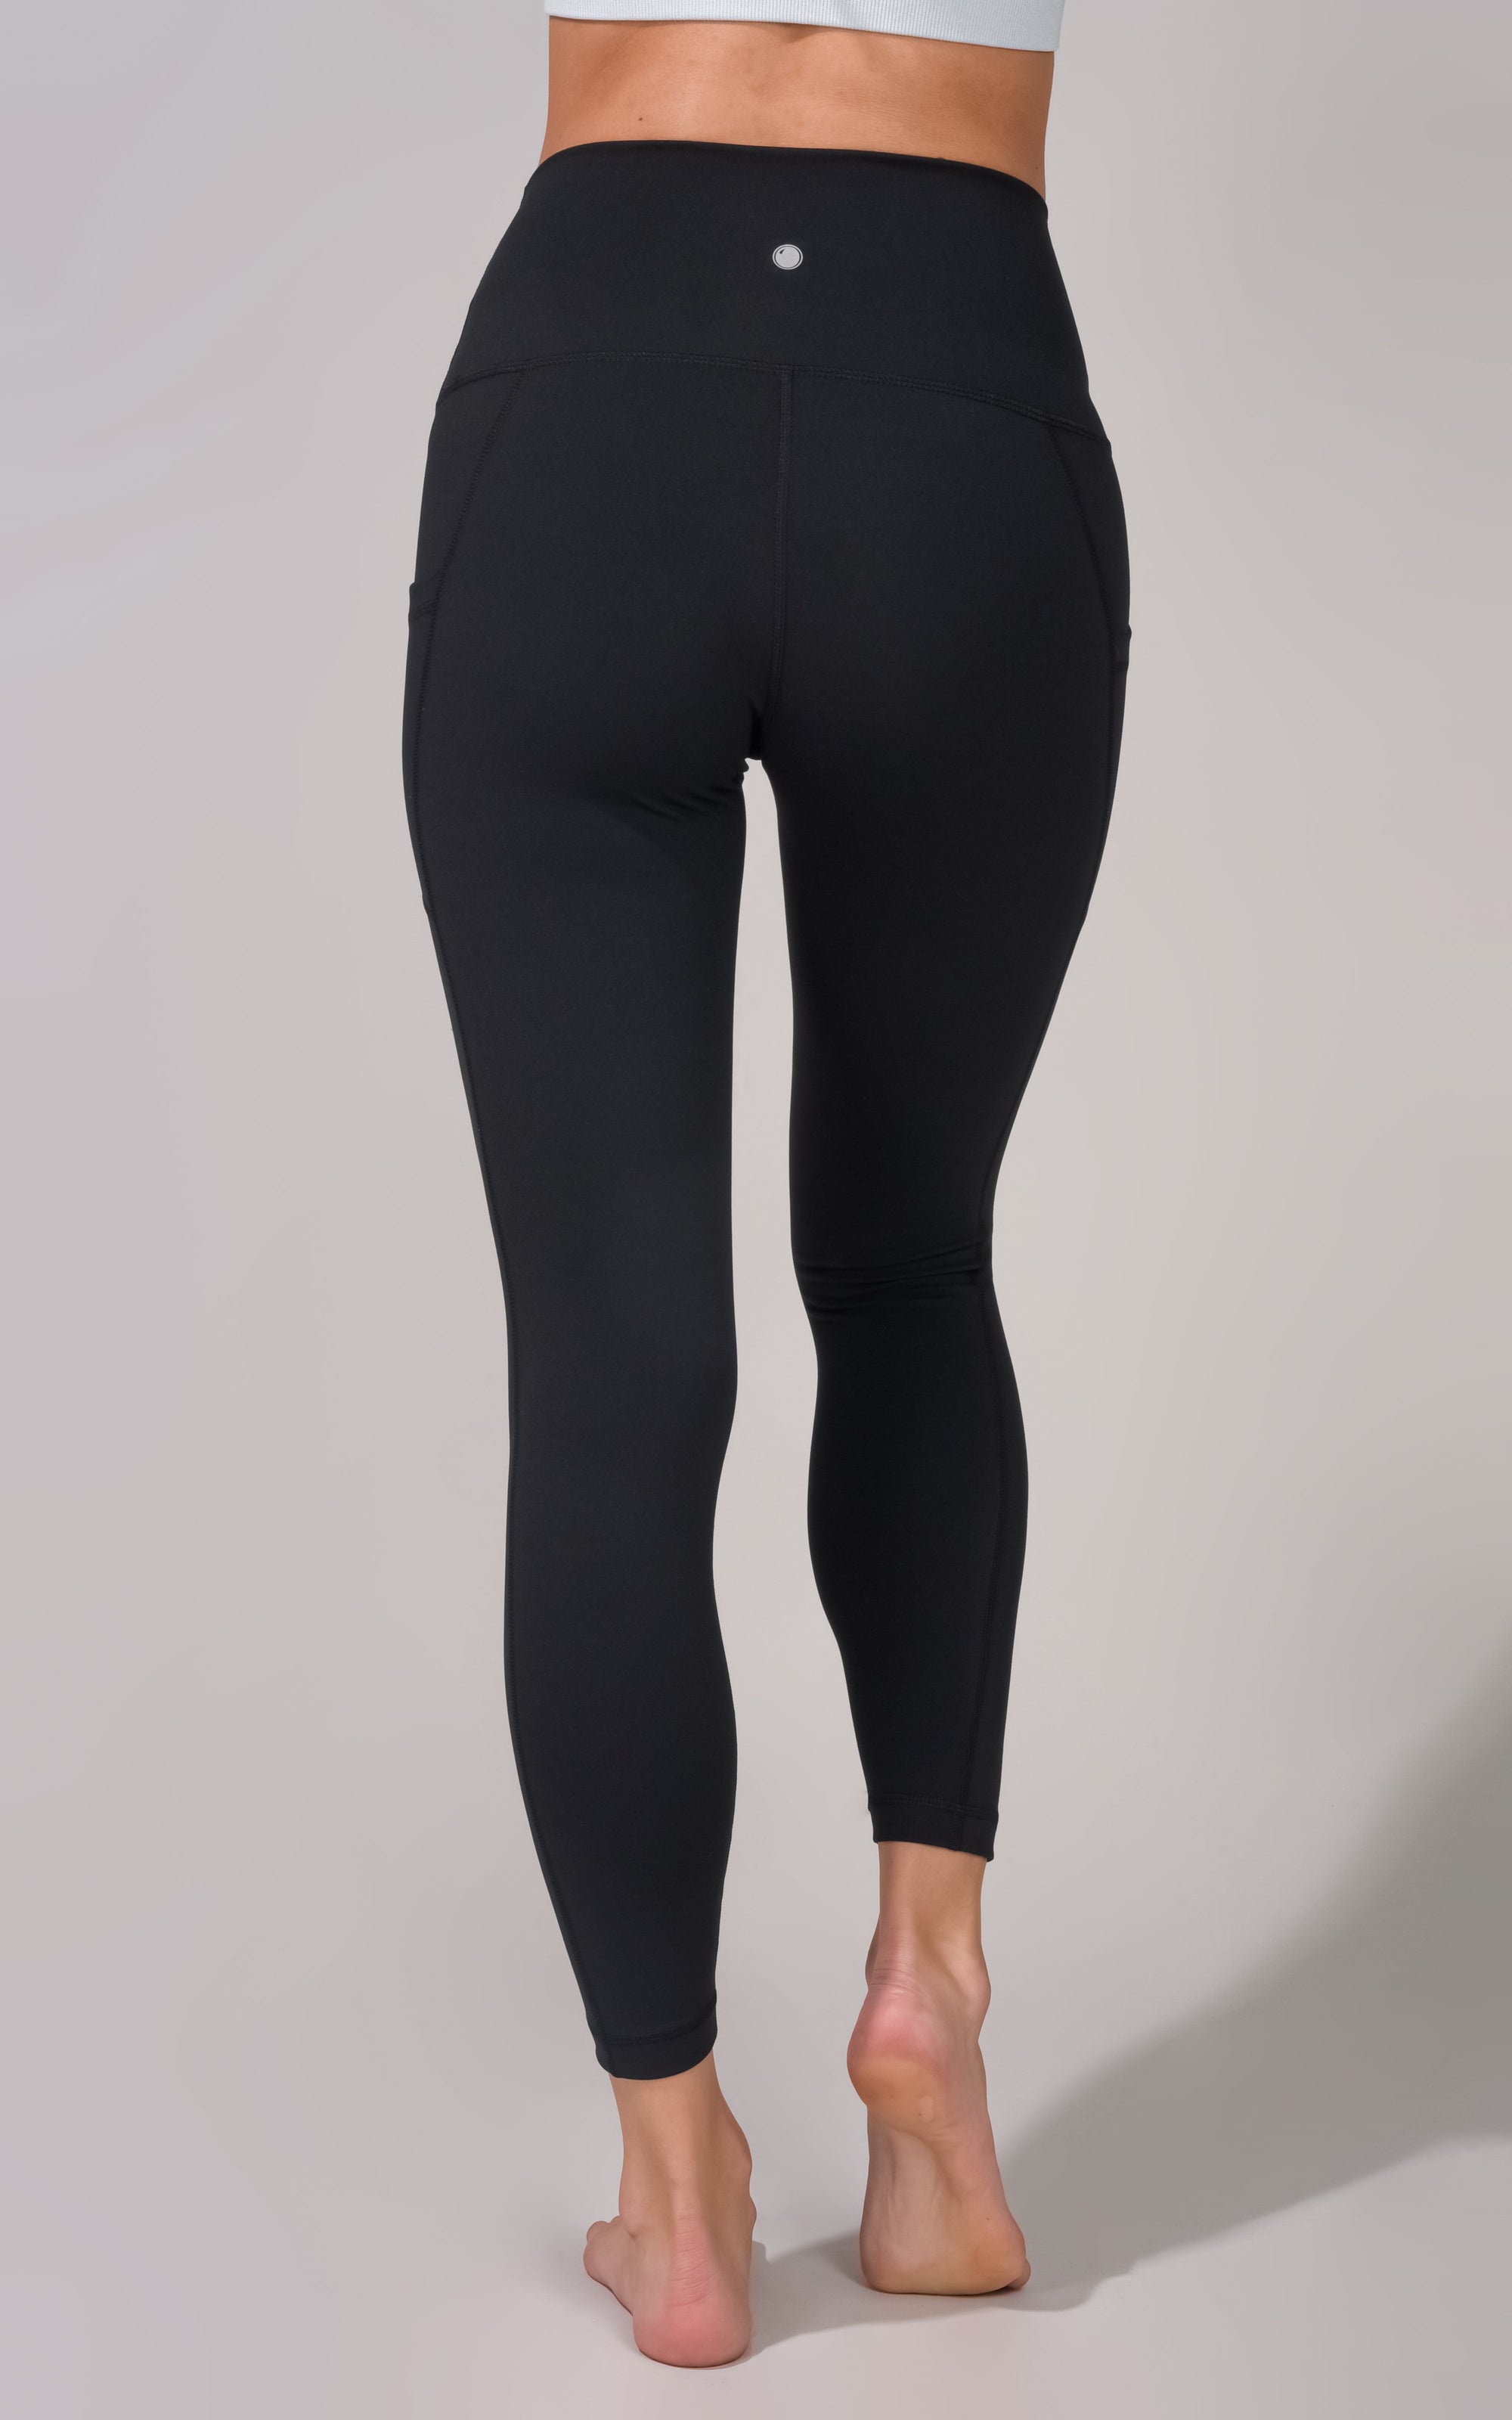 Yogalicious Lux Hi Rise Side Pockets Capri Length Black Camo Leggings Size  1x - $40 (44% Off Retail) New With Tags - From Vivian